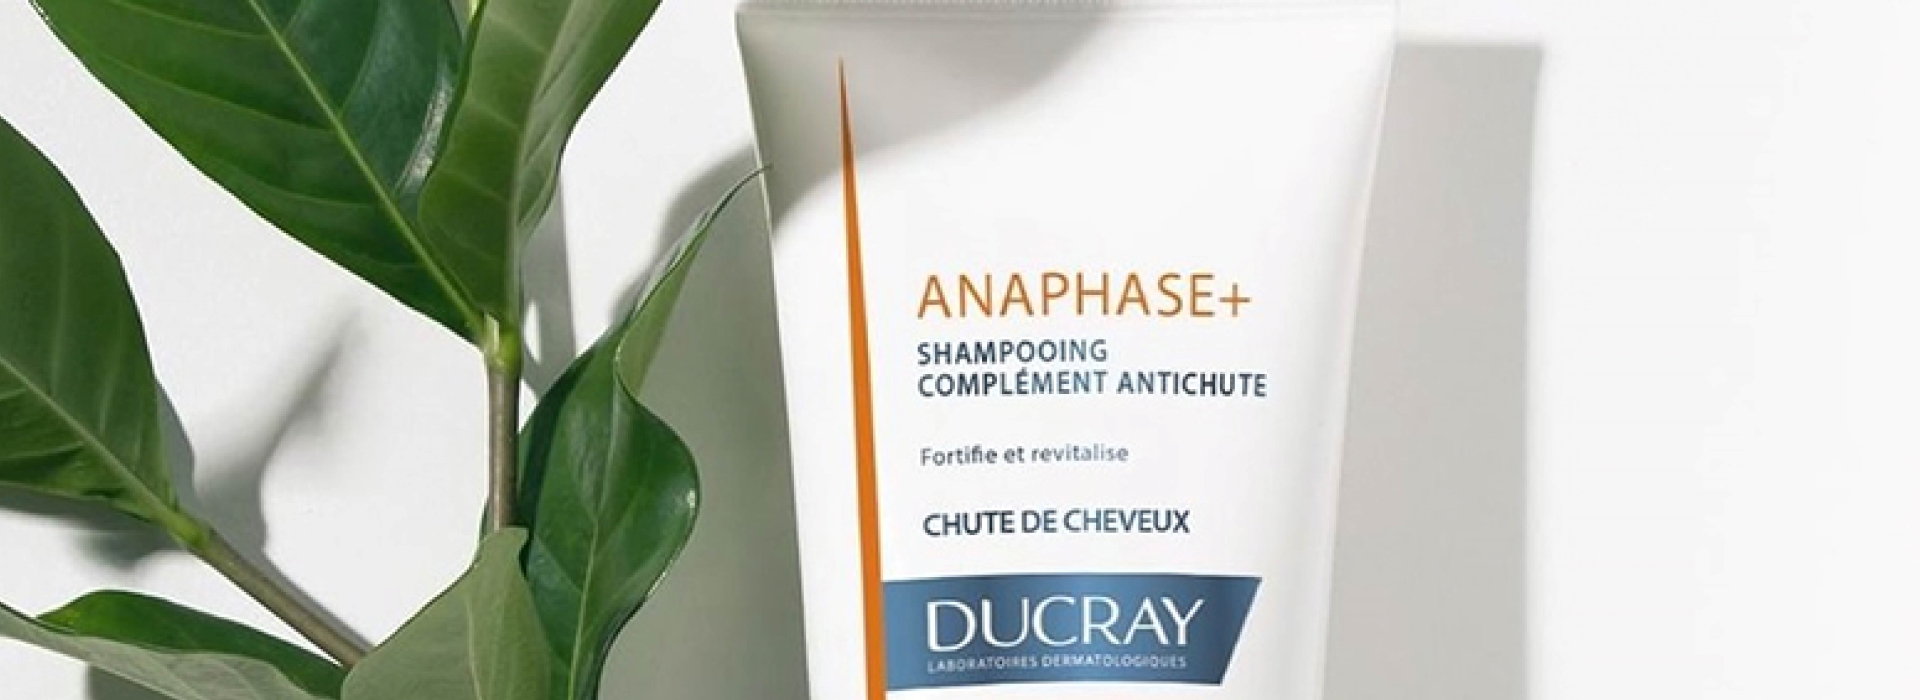 Ducray-Anaphase+